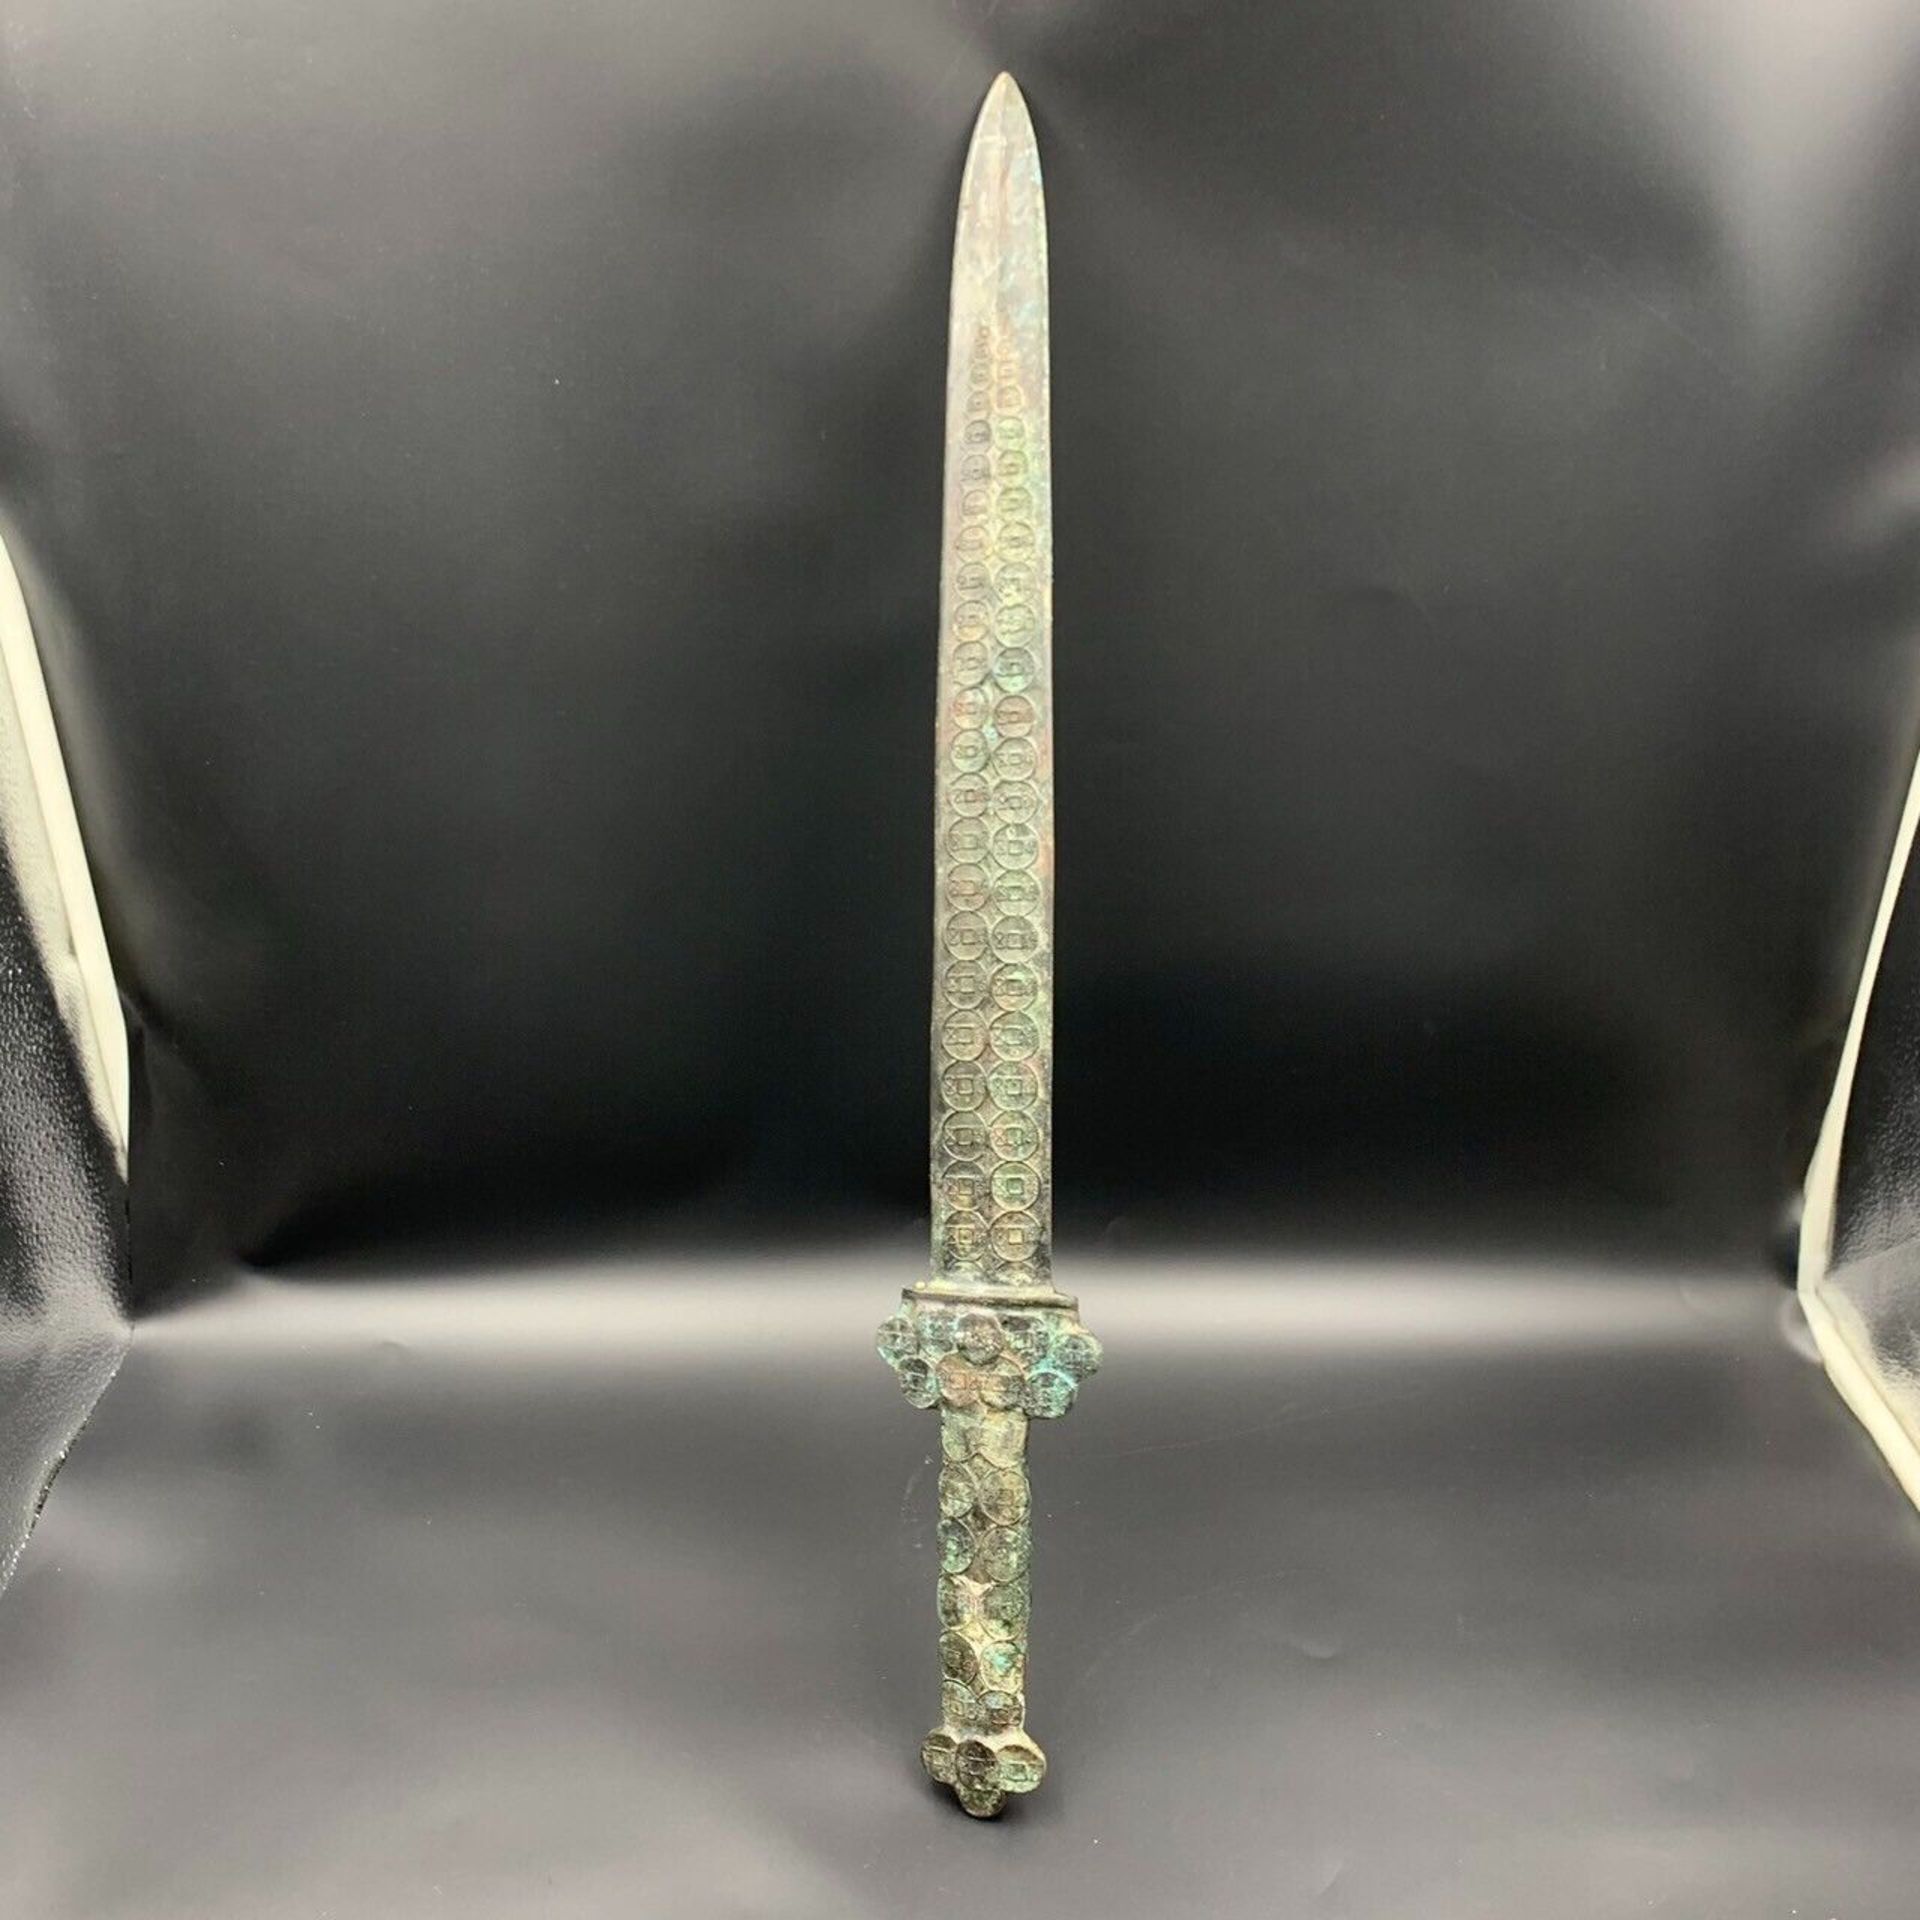 Incredible Rare Handcrafted Art Antique Asian Wonderful Bronze Sword - Image 2 of 9